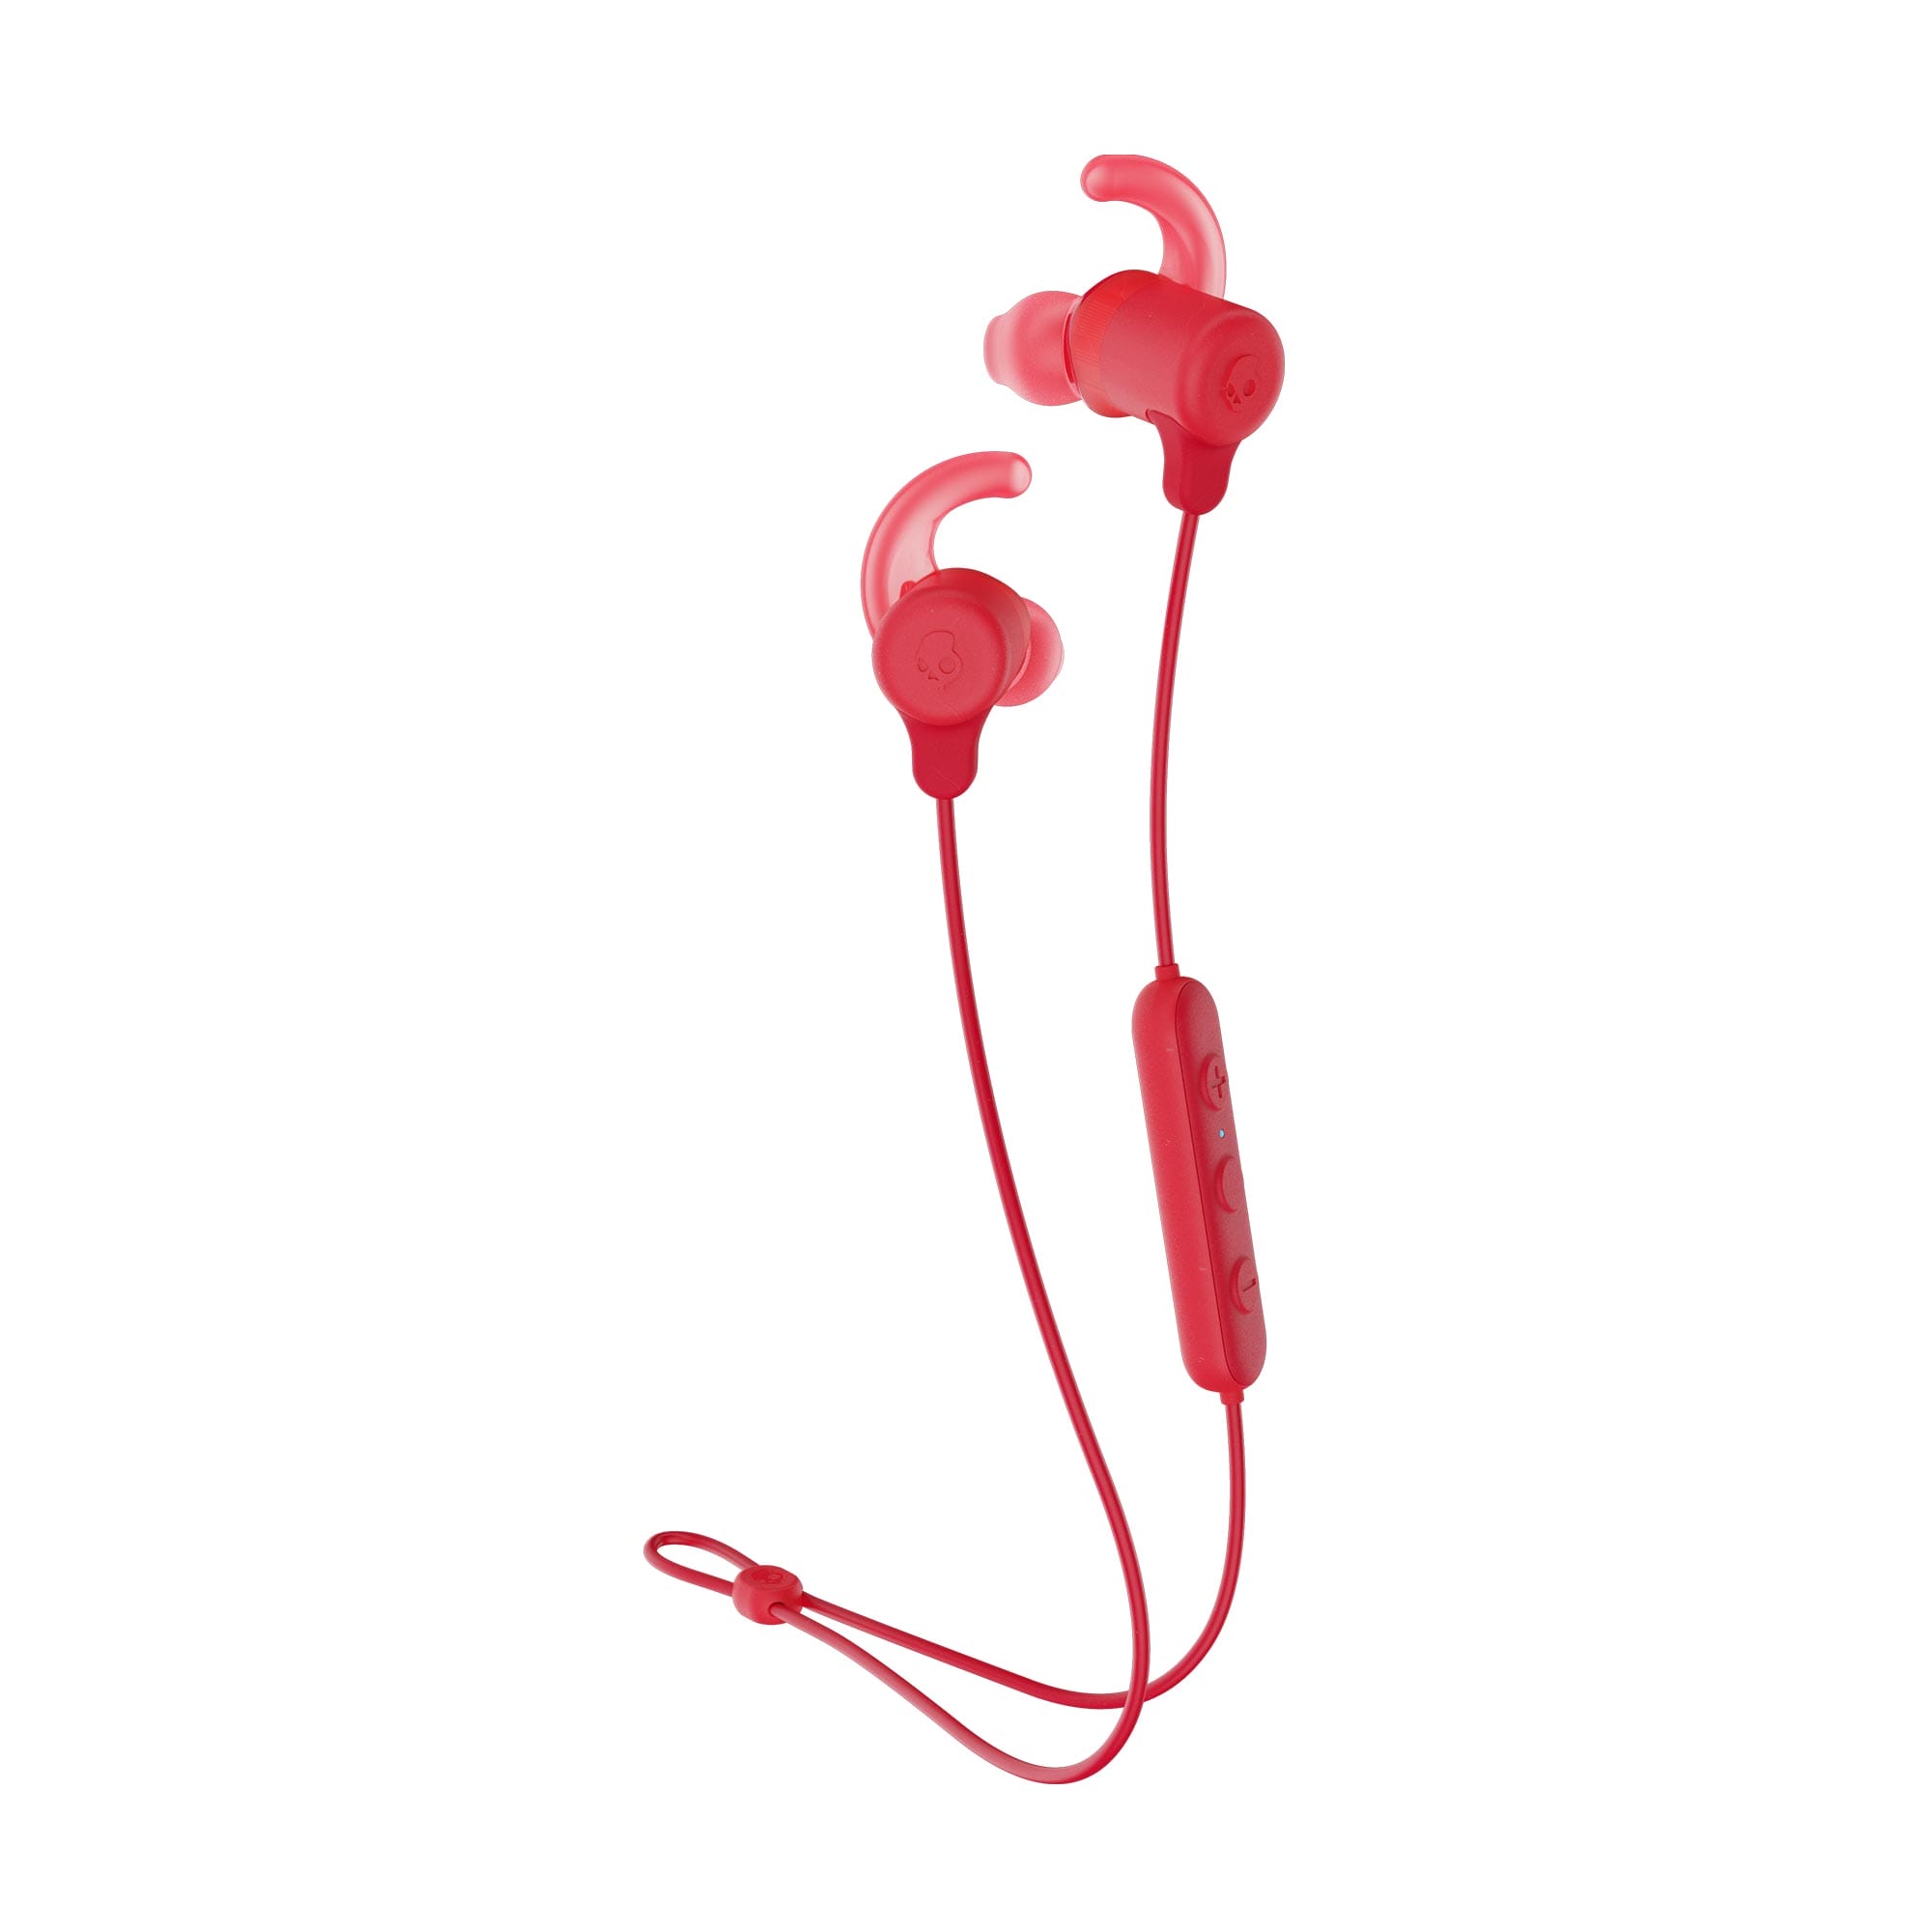 Skullcandy Jib+ Active Wireless BT Earbuds with Microphone – Red for $28